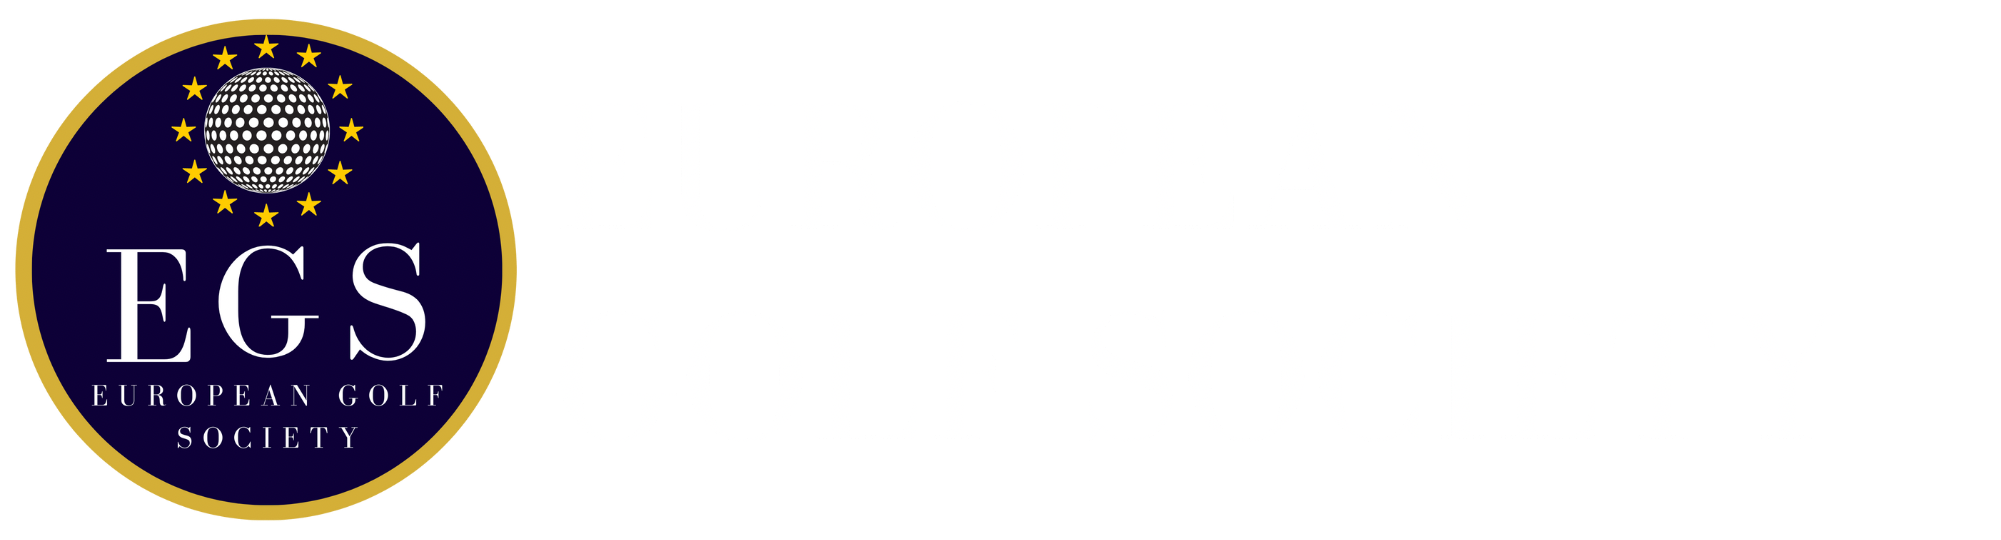 European Golf Society, Golf Tournaments, Golf Hotels, Golf Courses, Golf Travels and Golf Players in Europe